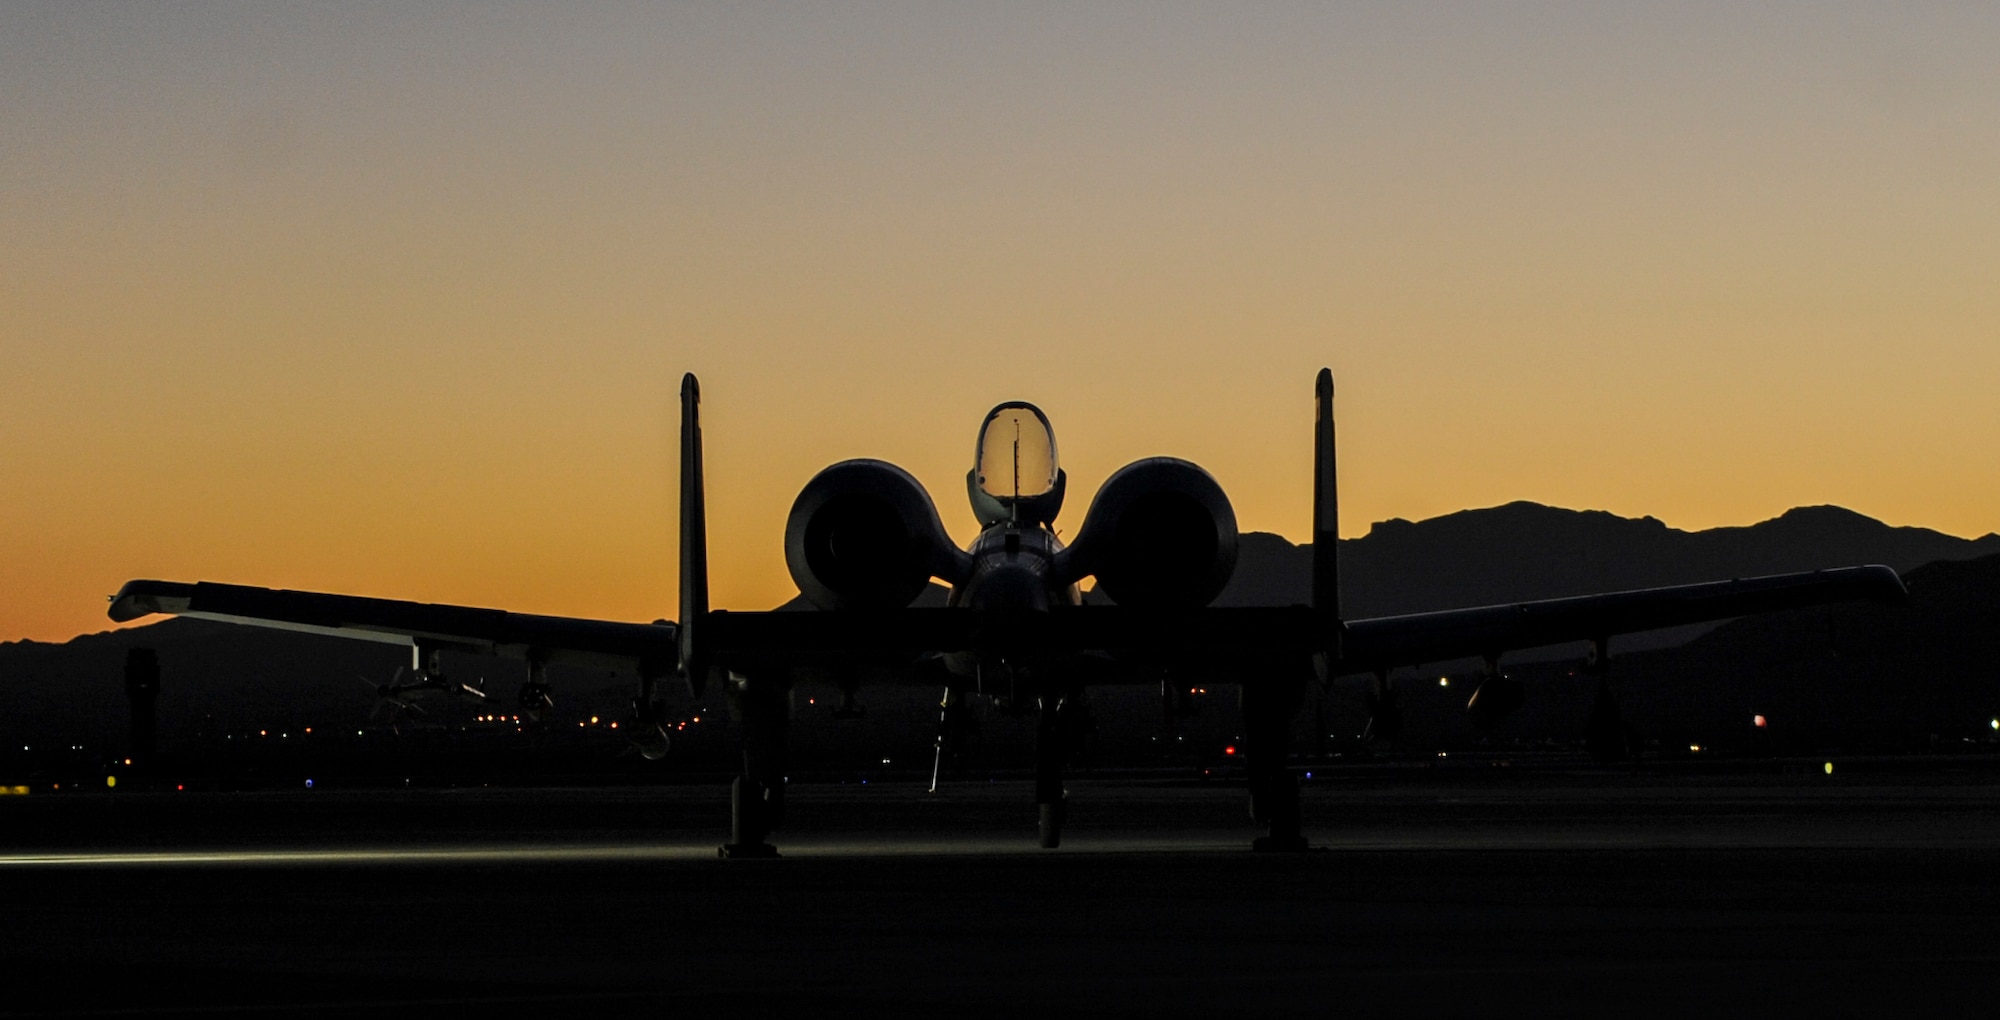 An A-10 Thunderbolt II assigned to 357th Fighter Squadron, Davis-Monthan Air Force Base, Ariz., sits on the flightline before participating in Green Flag 17-01 at Nellis Air Force Base, Nev., Oct. 4, 2016. Green Flag is a close air support and joint integration exercise administered by the U.S. Air Force Air Warfare Center at Nellis AFB through the 549th Combat Training Squadron. (U.S. Air Force photo by Airman 1st Class Kevin Tanenbaum/Released)